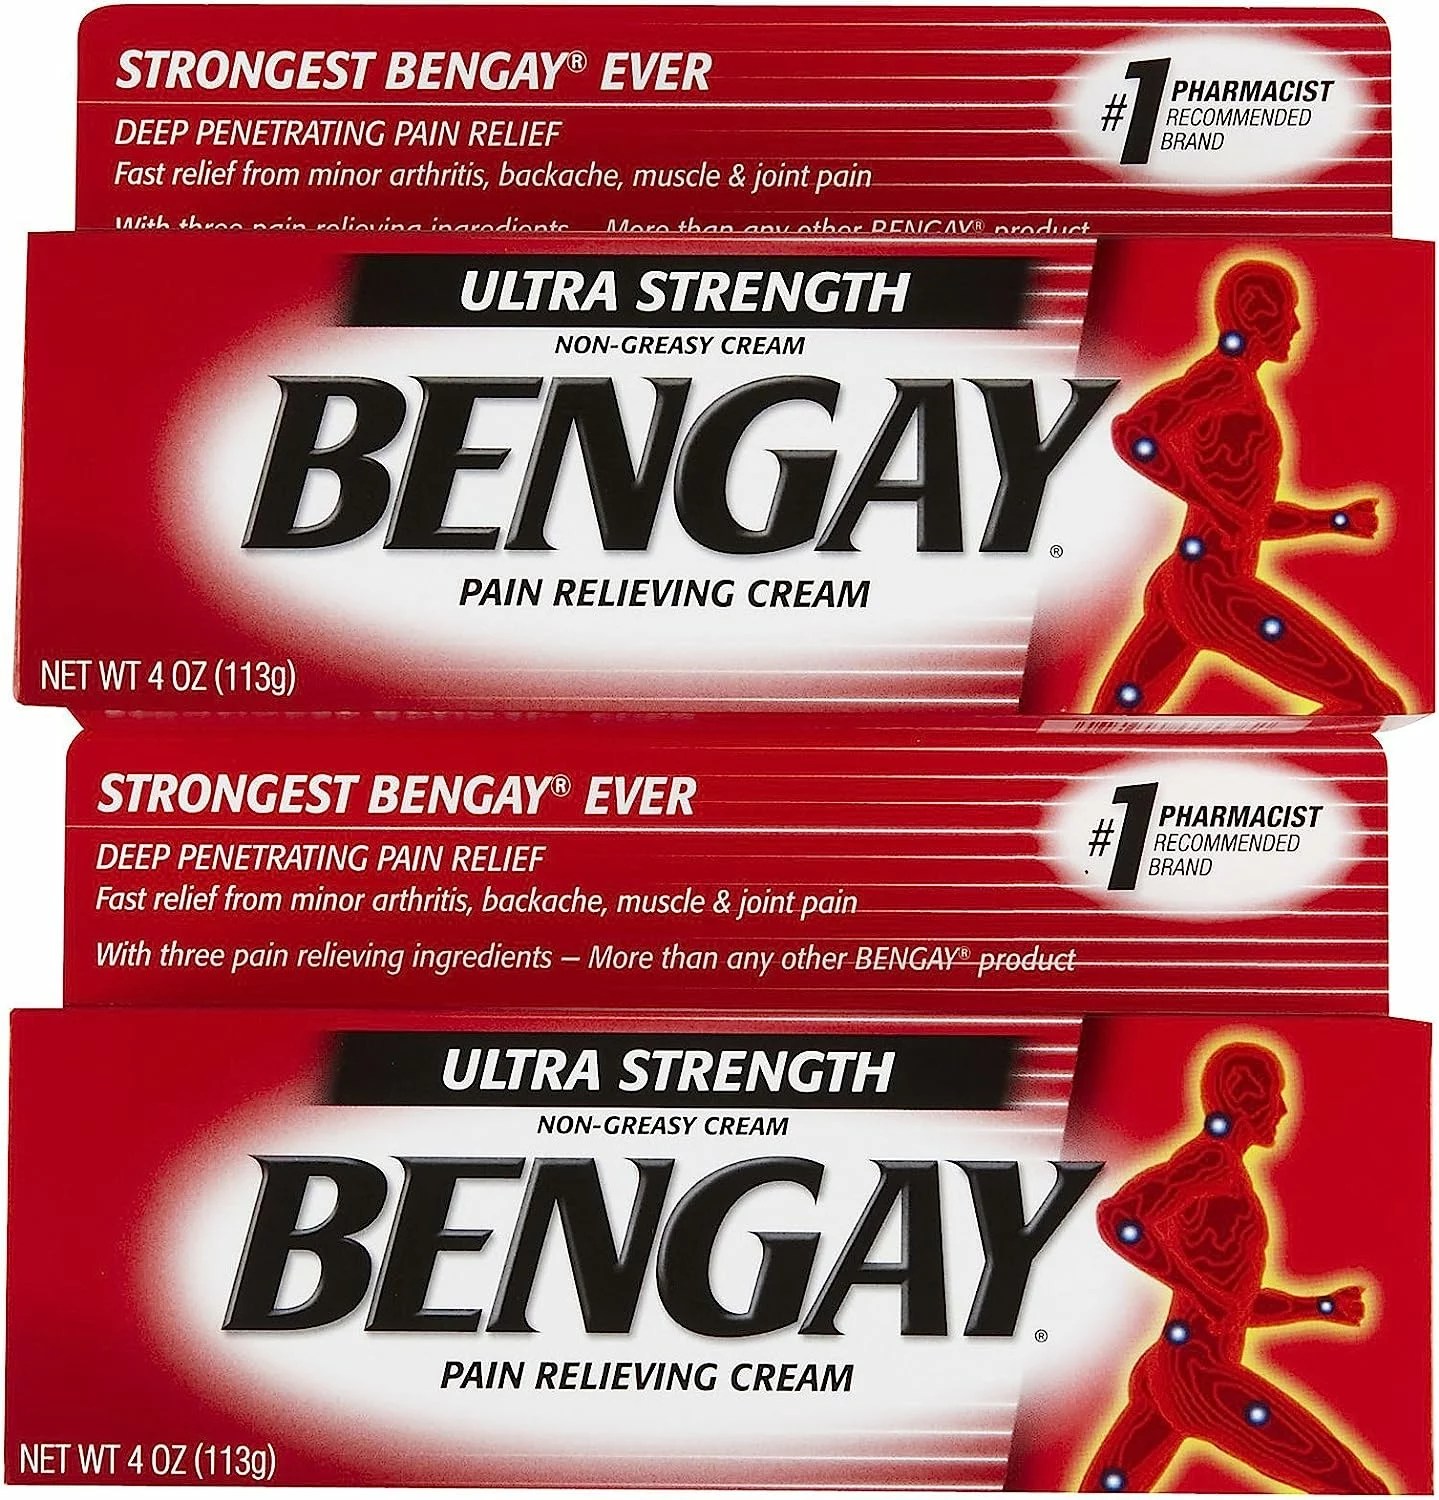 bengay pain relieving cream for chronic back pain, recommended by chiropractors